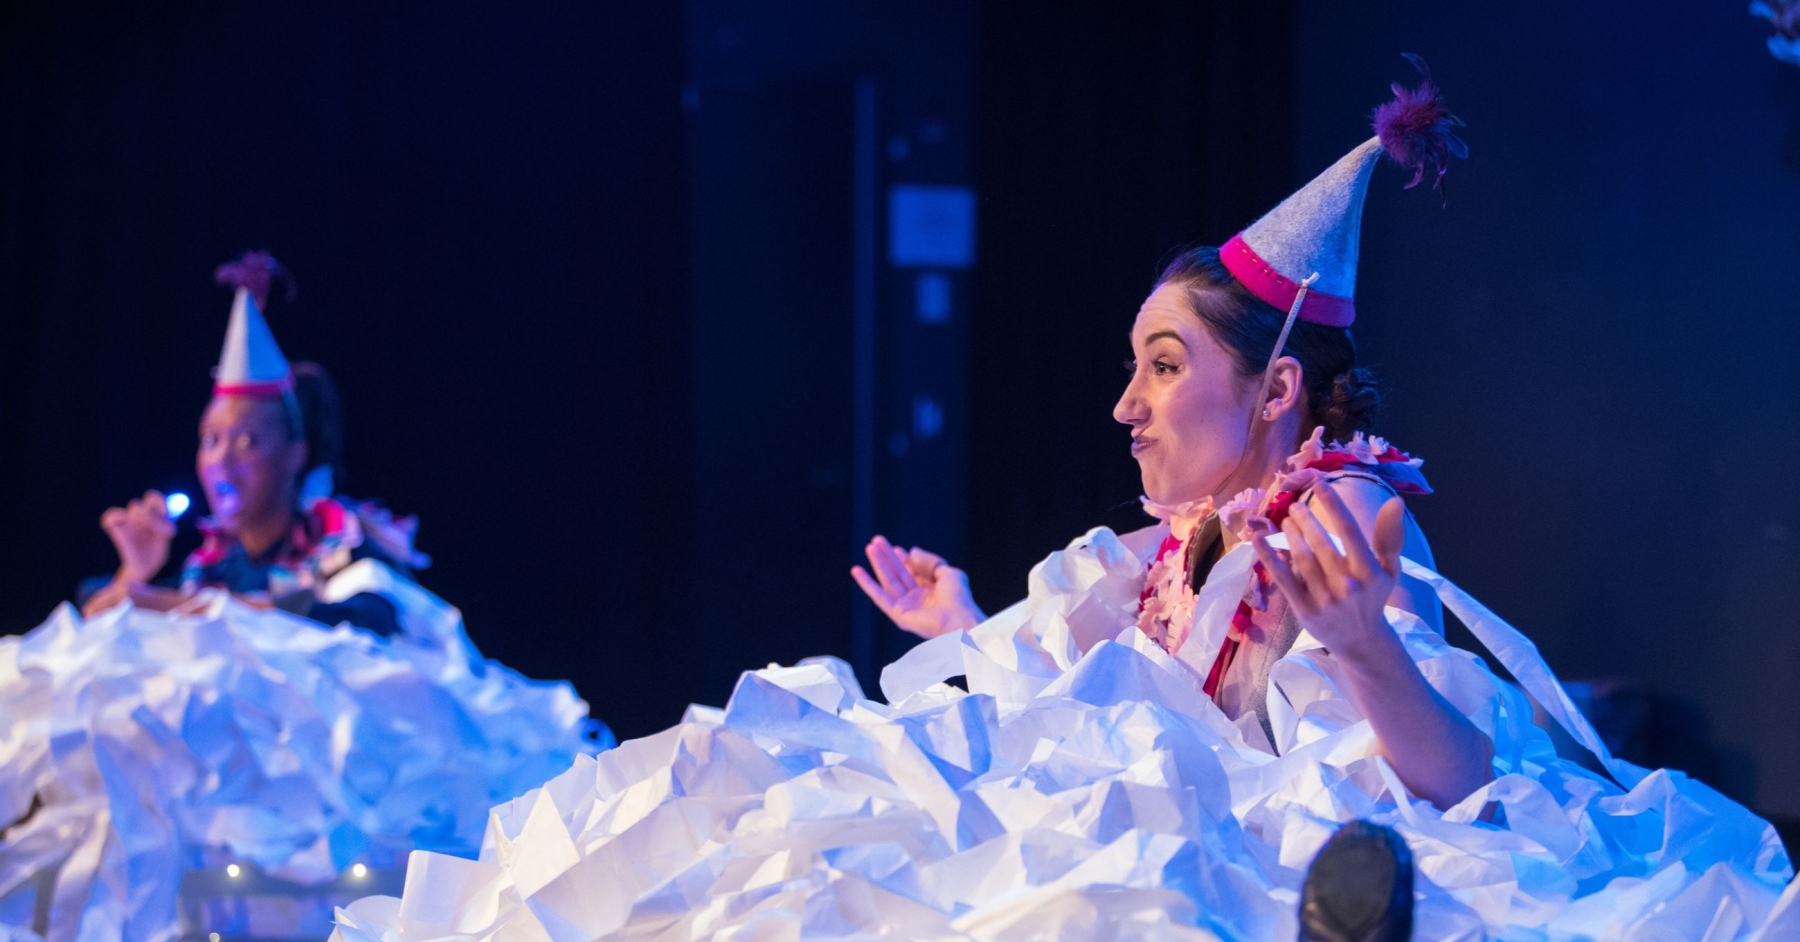 woman with party hat on sitting in a pile of shredded paper